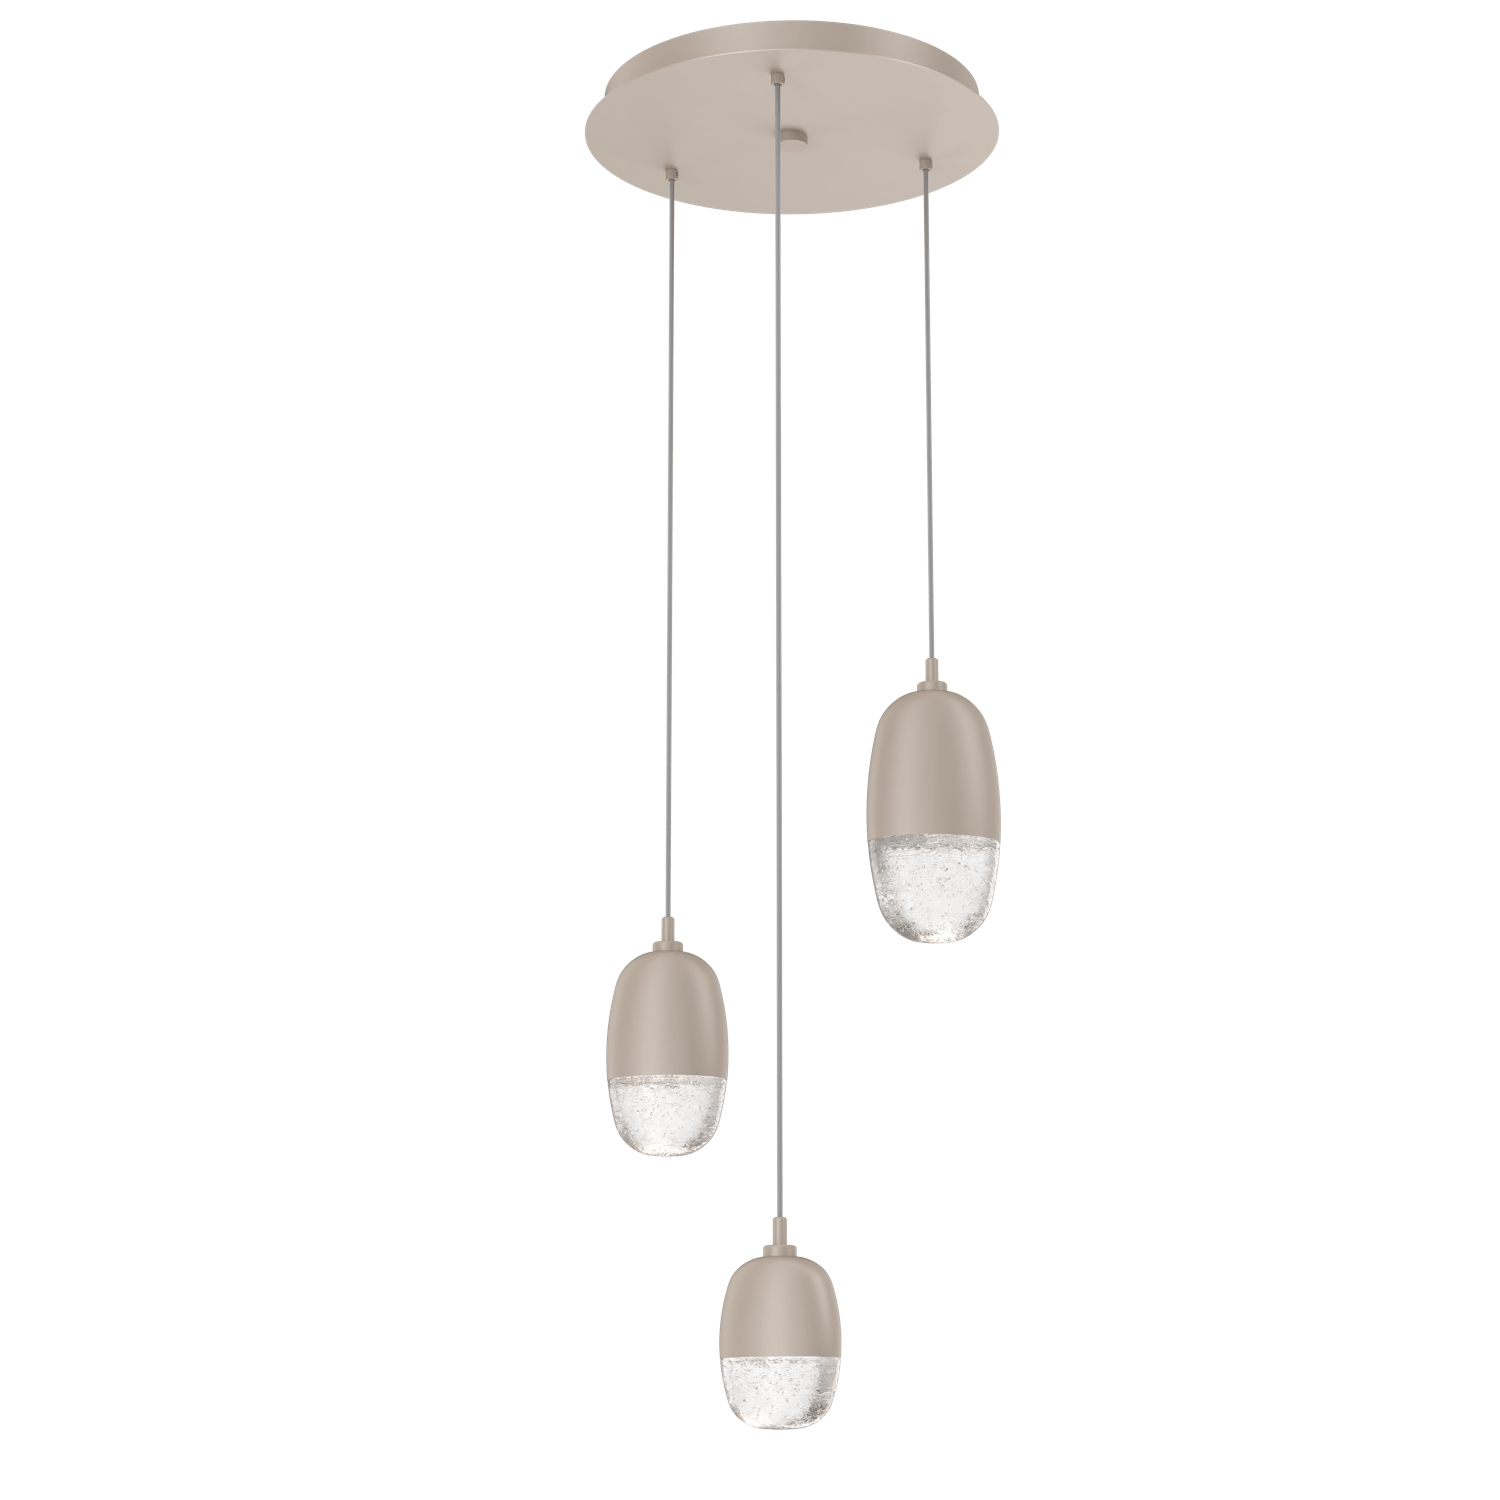 CHB0079-03-BS-Hammerton-Studio-Pebble-3-light-round-pendant-chandelier-with-metallic-beige-silver-finish-and-clear-cast-glass-shades-and-LED-lamping